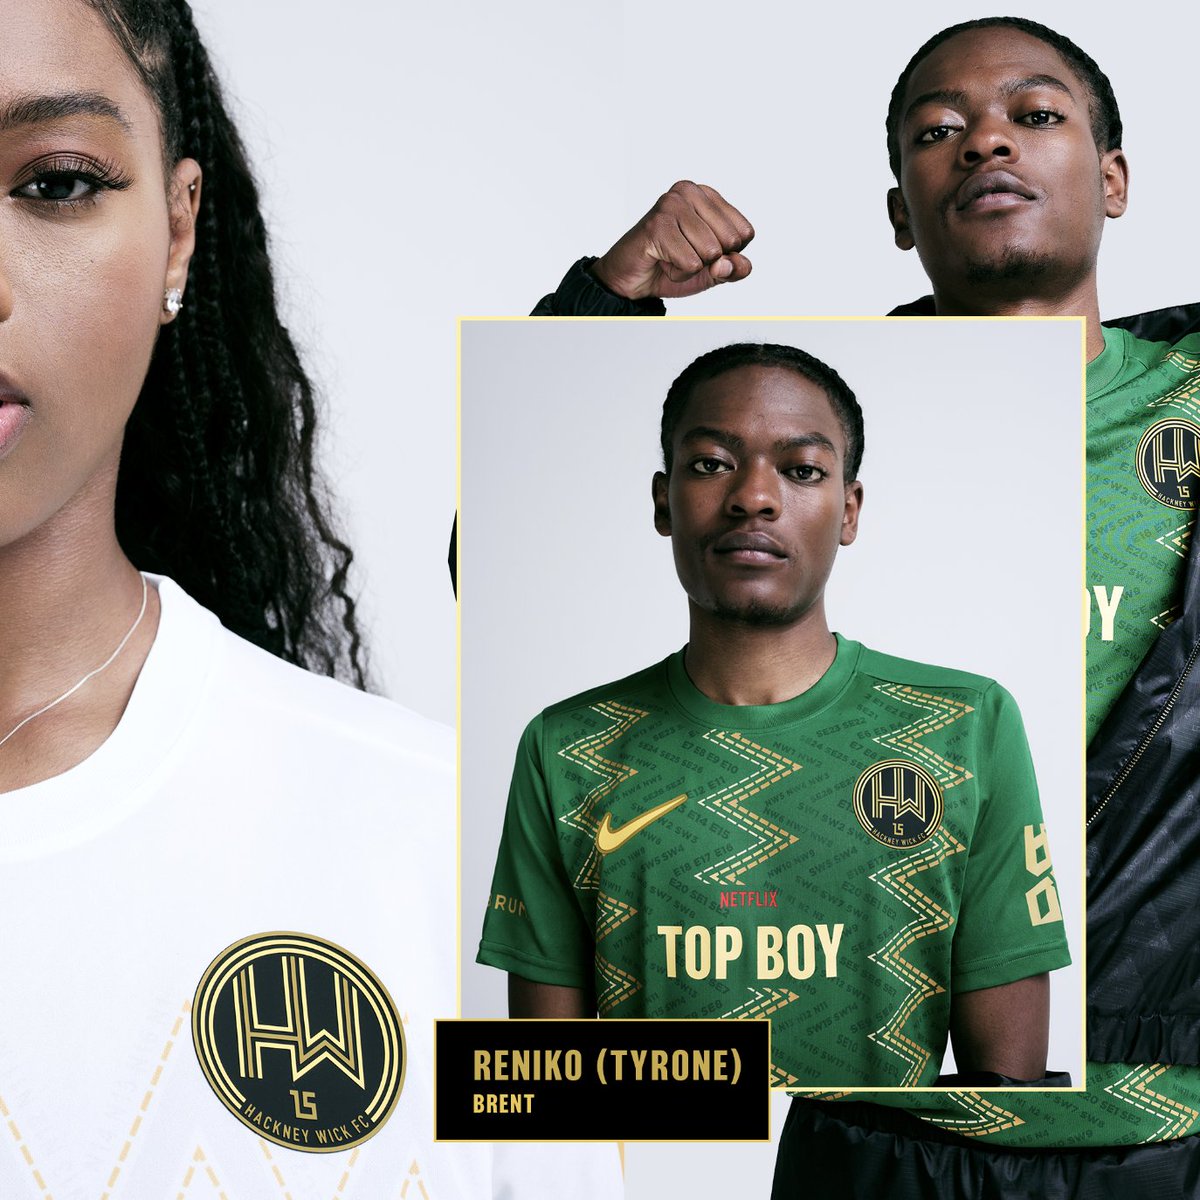 Hackney Wick FC x TOP BOY x Labrum: 23/24 Season Home & Away Kits designed by @LabrumLondon are now available ⚽️  

We're so proud to be supporting Hackney Wick FC, working with Founder, Bobby Kasanga, to cement the future of the club.